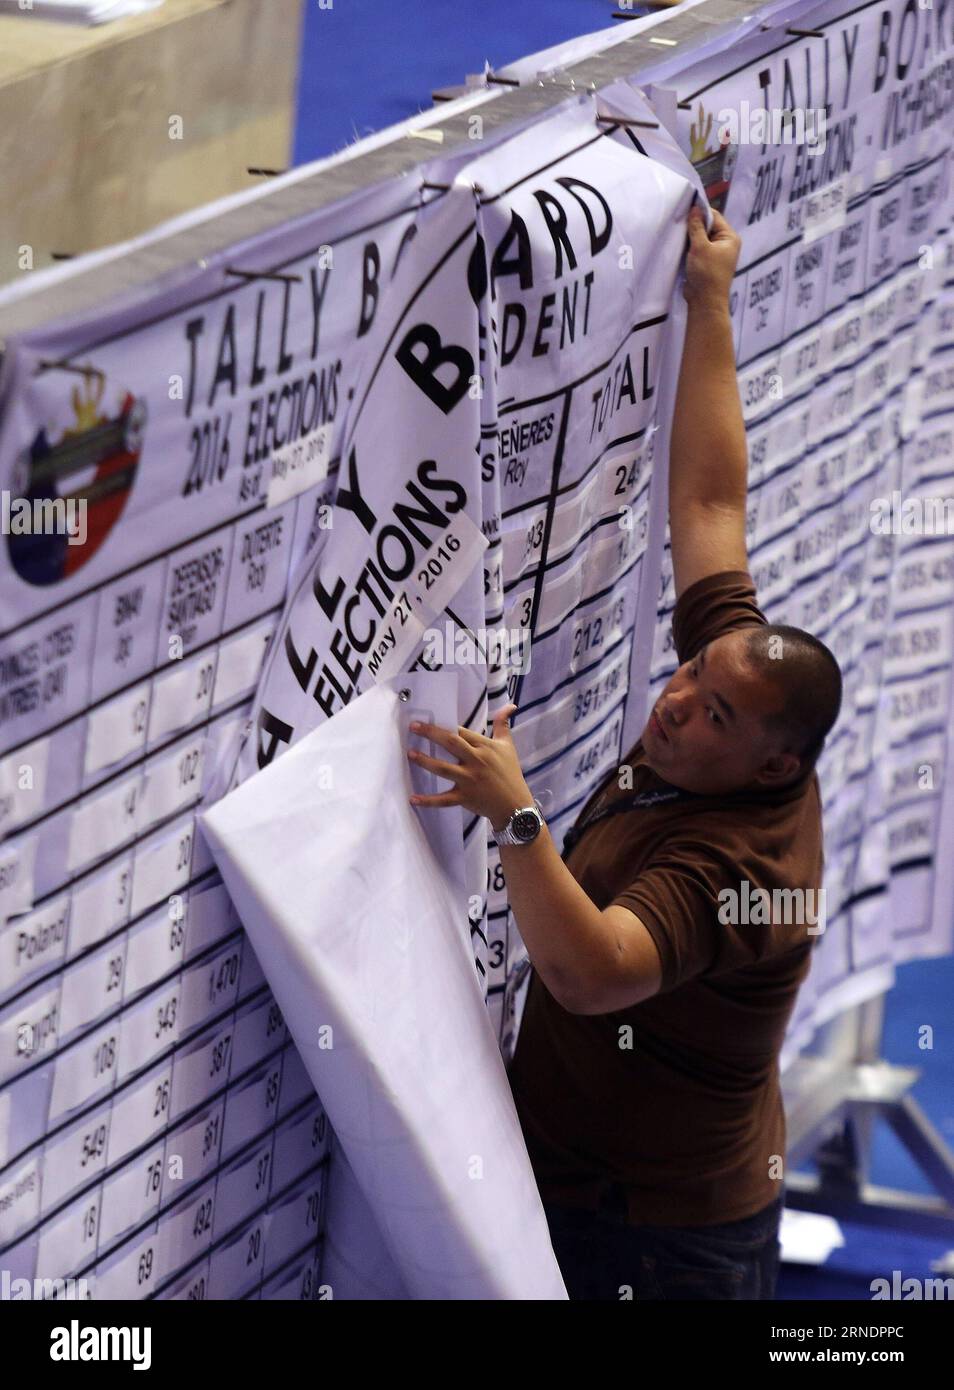 (160527) -- QUEZON CITY, May 27, 2016 -- A Philippine Congress official removes a tally sheet from a board after the official counting of votes from the May 9 elections of president and vice president at the House of Representatives in Quezon City, the Philippines, May 27, 2016. Rodrigo Duterte and Maria Leonor Robredo have officially won the May 9 presidential and vice-presidential elections respectively, said the final tally of votes by the Philippine Congress Friday. ) PHILIPPINES-QUEZON CITY-PRESIDENTIAL ELECTIONS-WINNERS ROUELLExUMALI PUBLICATIONxNOTxINxCHN   160527 Quezon City May 27 201 Stock Photo